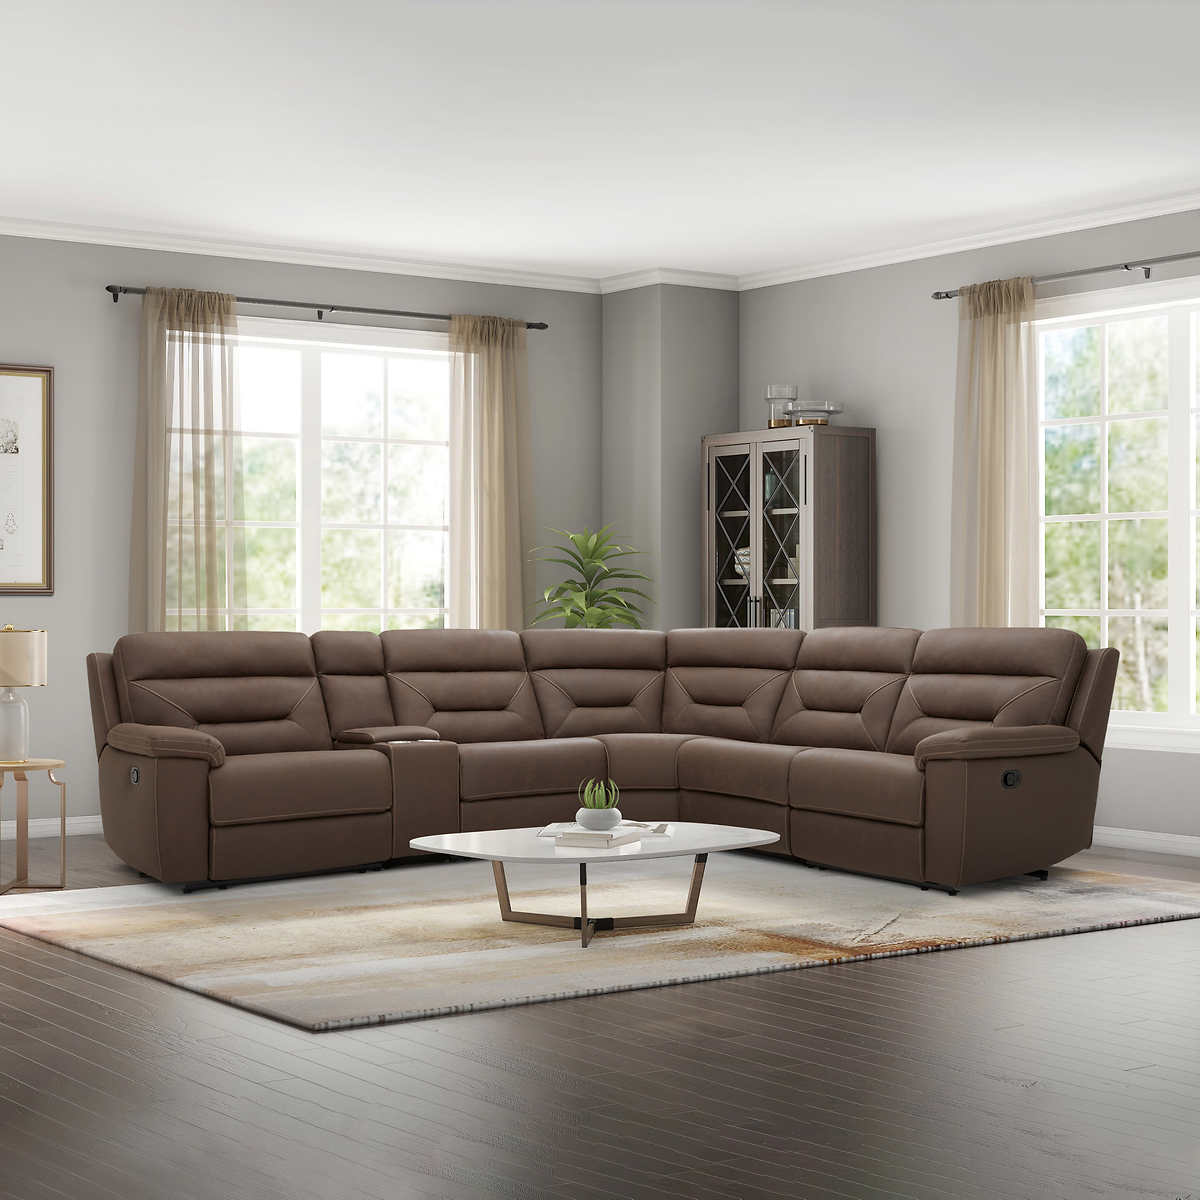 6 Piece Fabric Reclining Sectional Costco, Costco Sectional Sofa With Recliner